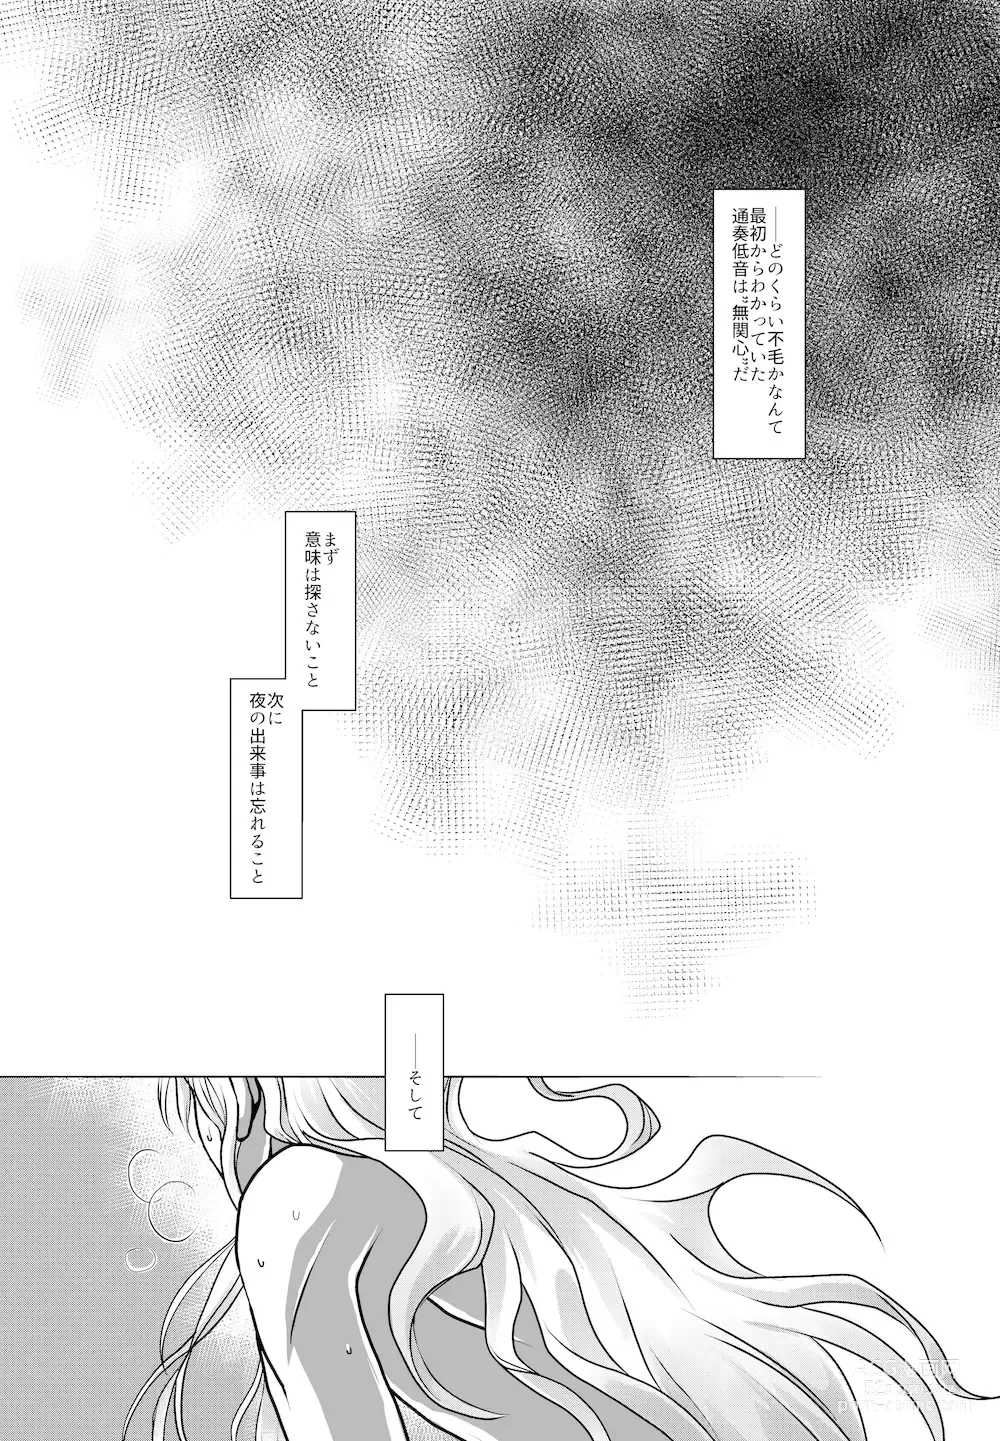 Page 19 of doujinshi THE THIRD LIE